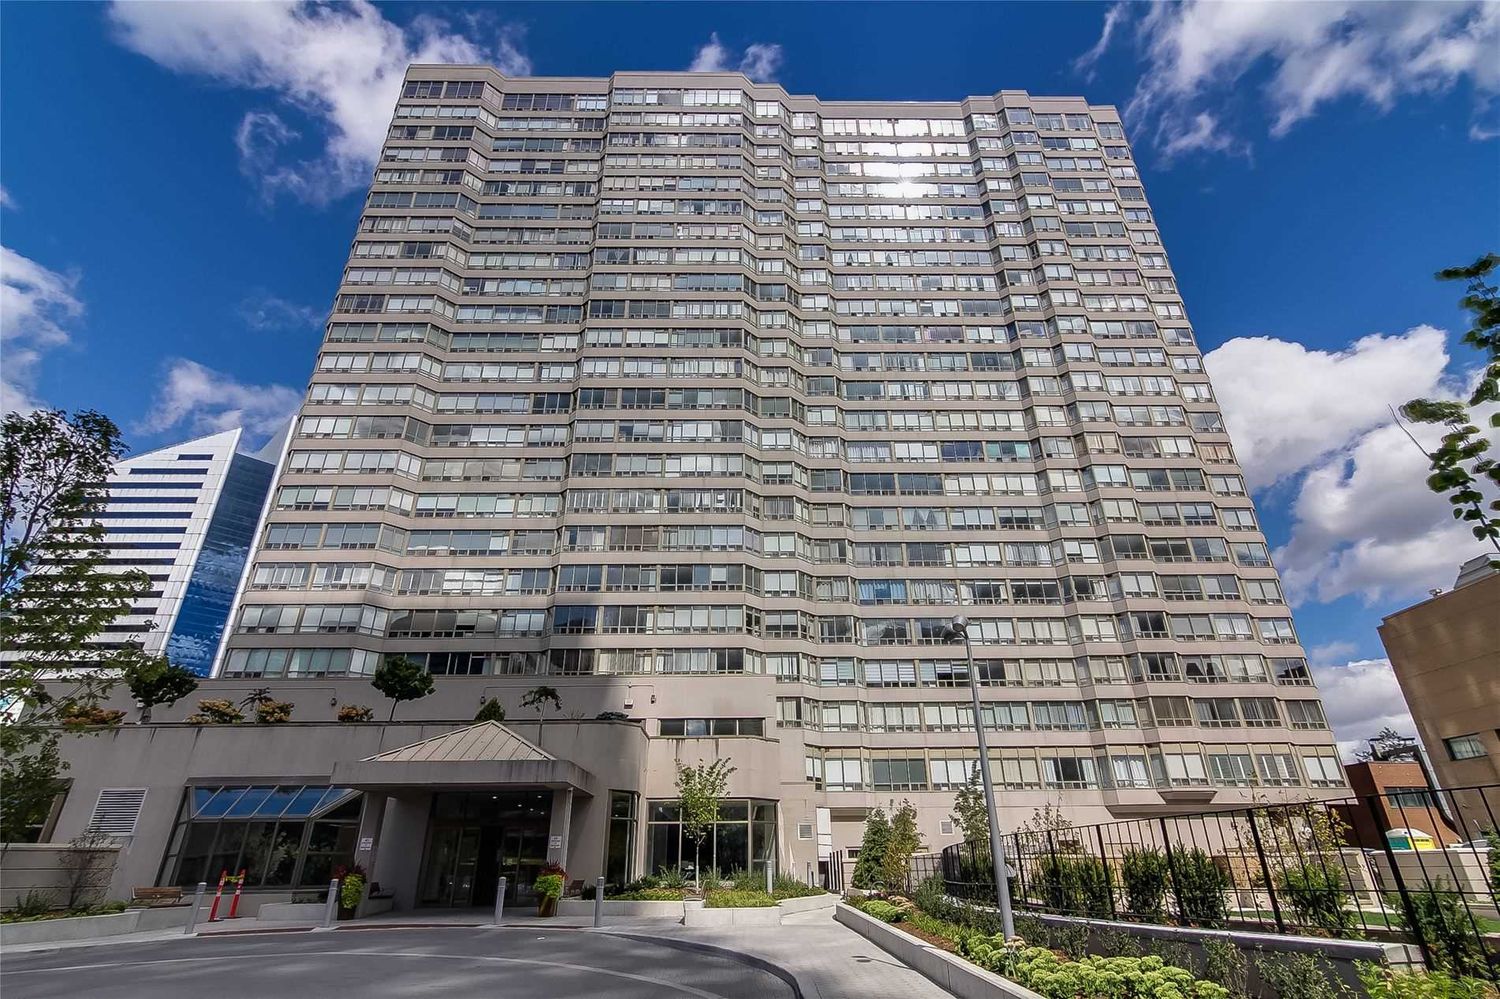 30 Greenfield Avenue. Rodeo Walk Condos is located in  North York, Toronto - image #3 of 3